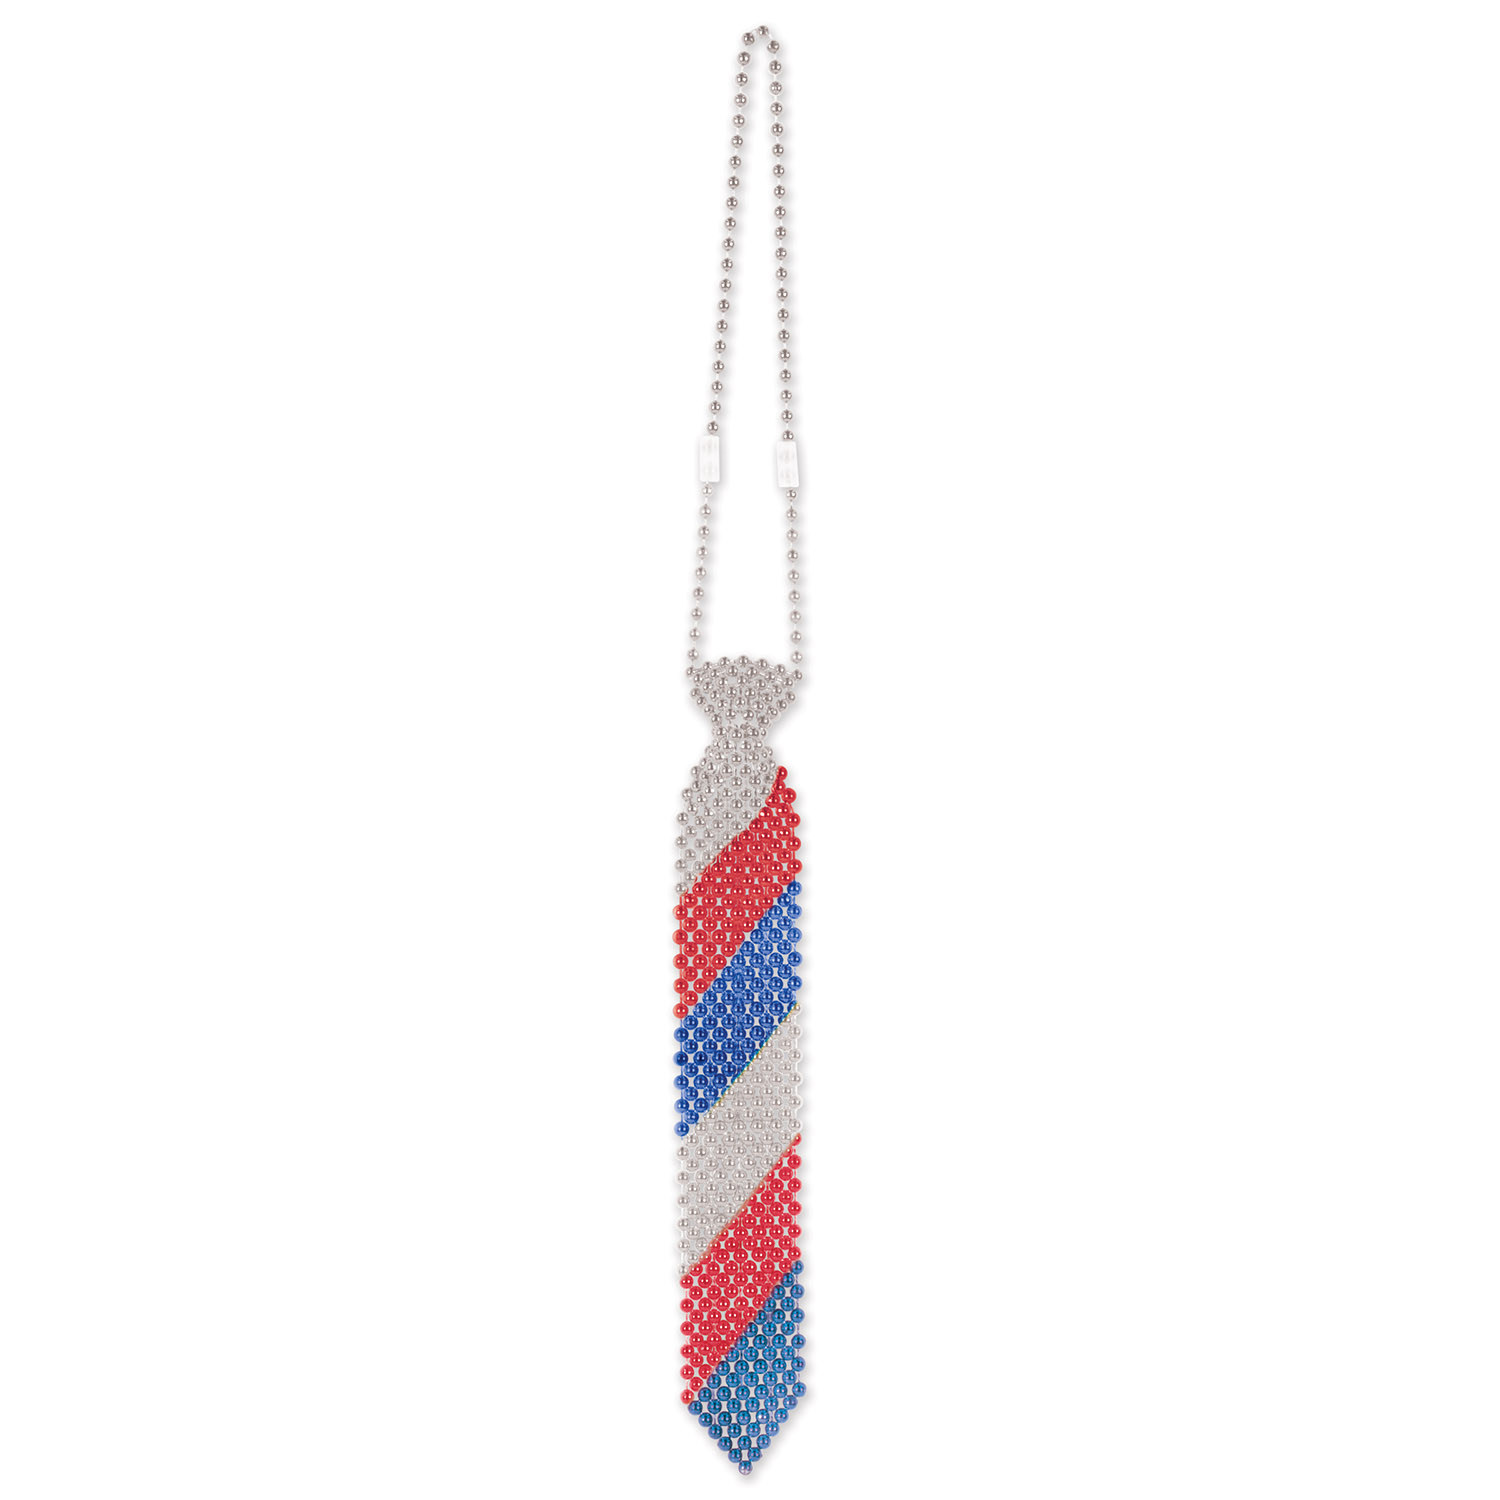 red white and blue tie made out of beads